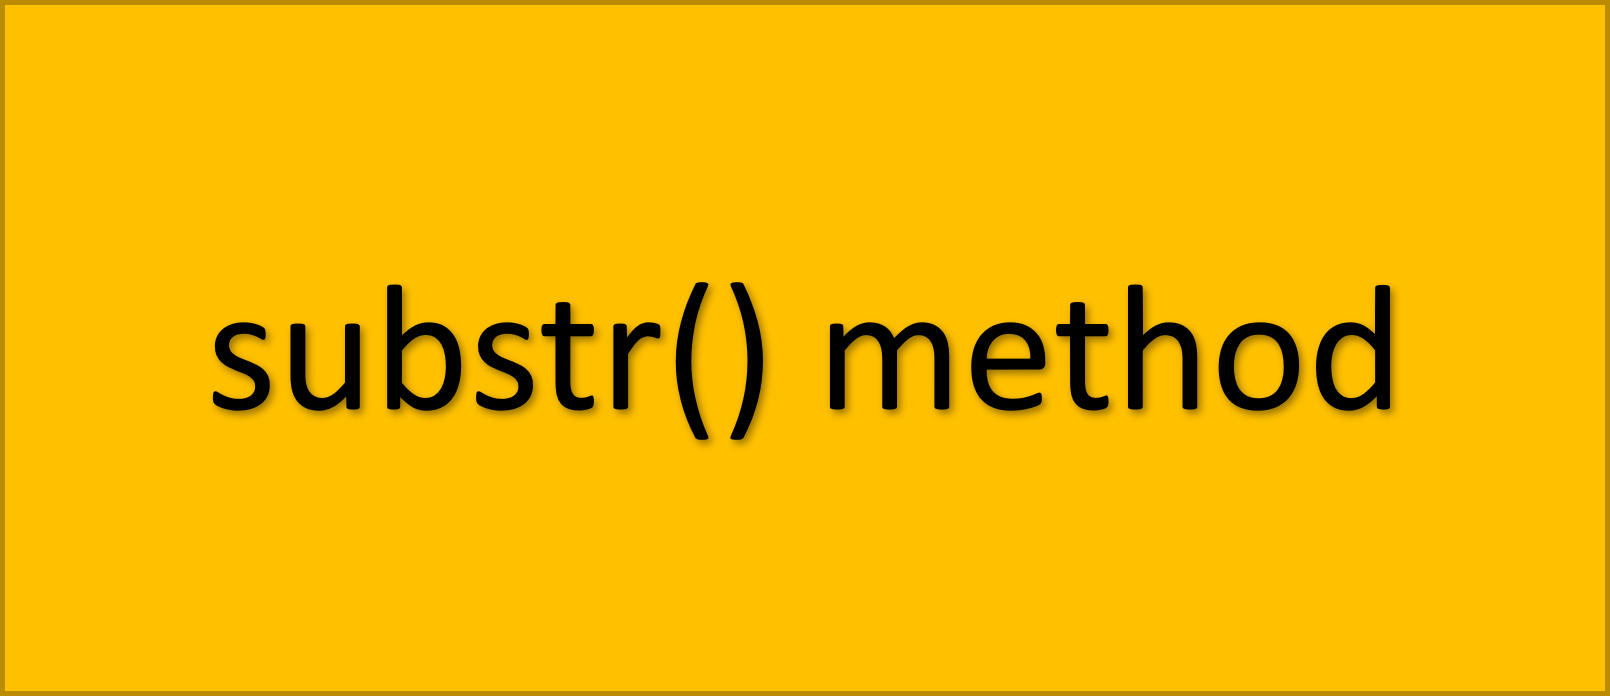 Difference between substr and substring